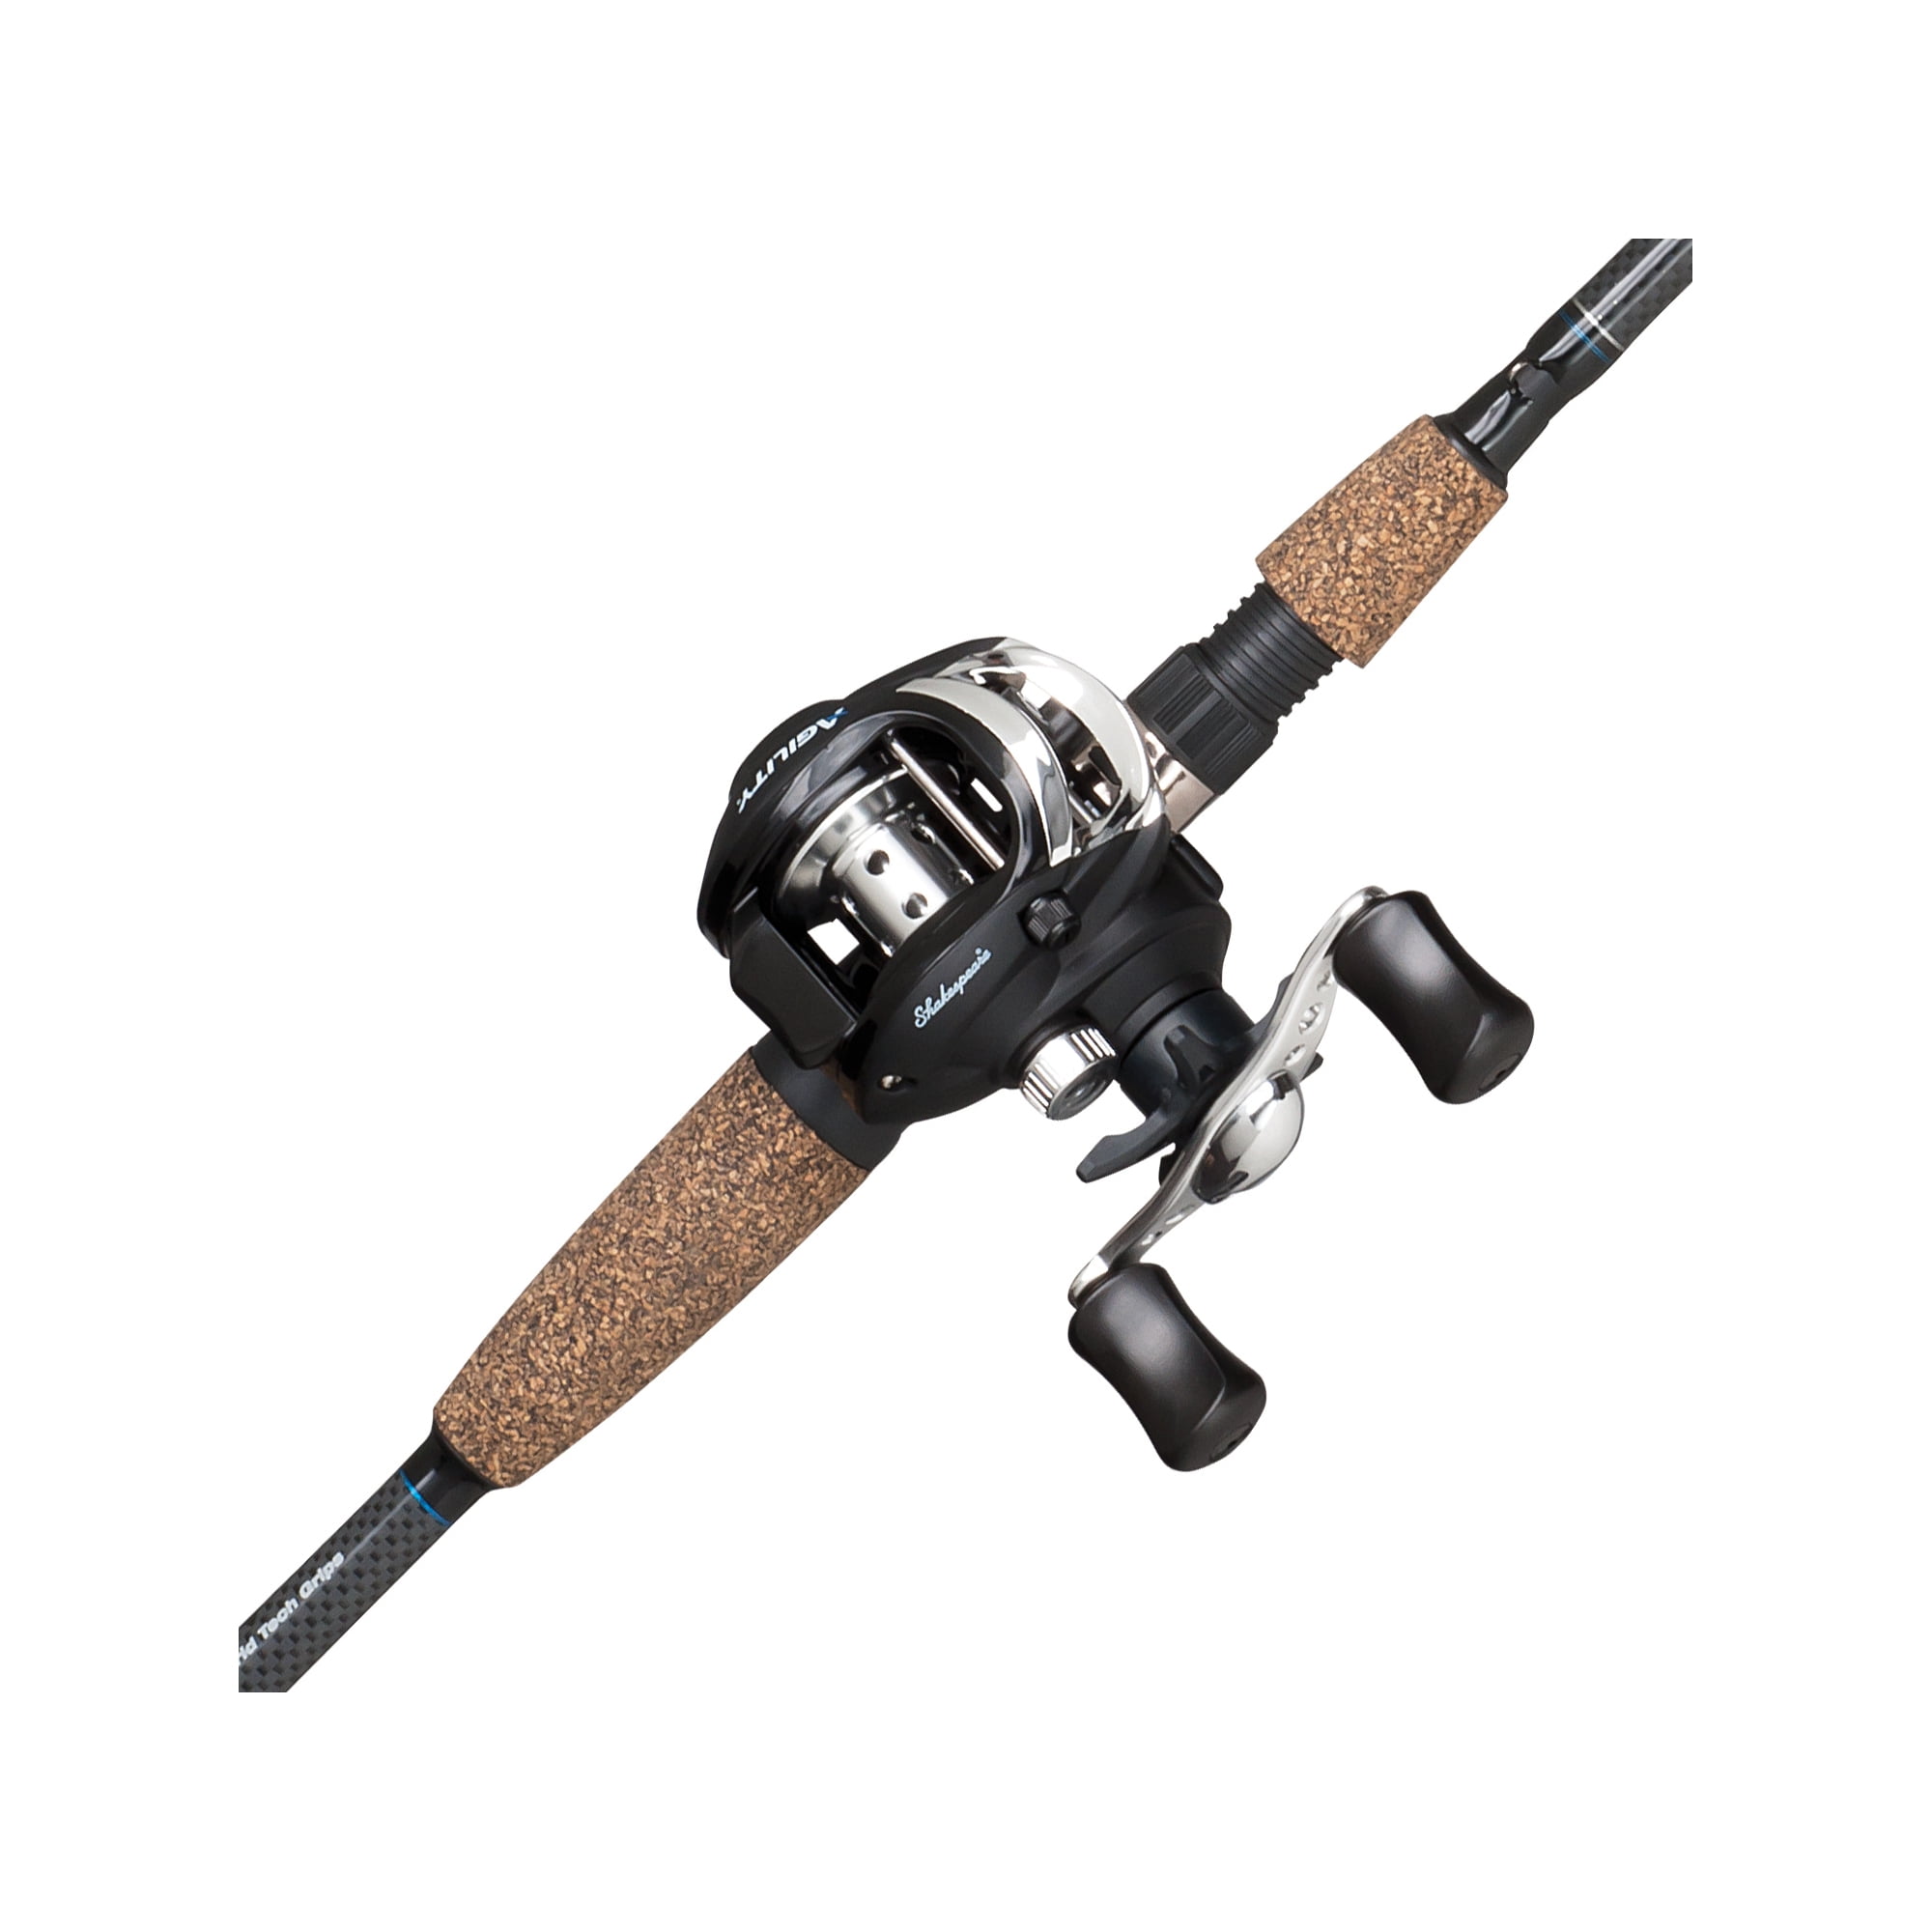 Shakespeare Agility Baitcast Combo, Low Profile Reel No Line, 3Bb, 6.2-1,  Alum Spool, 130/12, M AGLPCBO , $4.00 Off with Free S&H — CampSaver